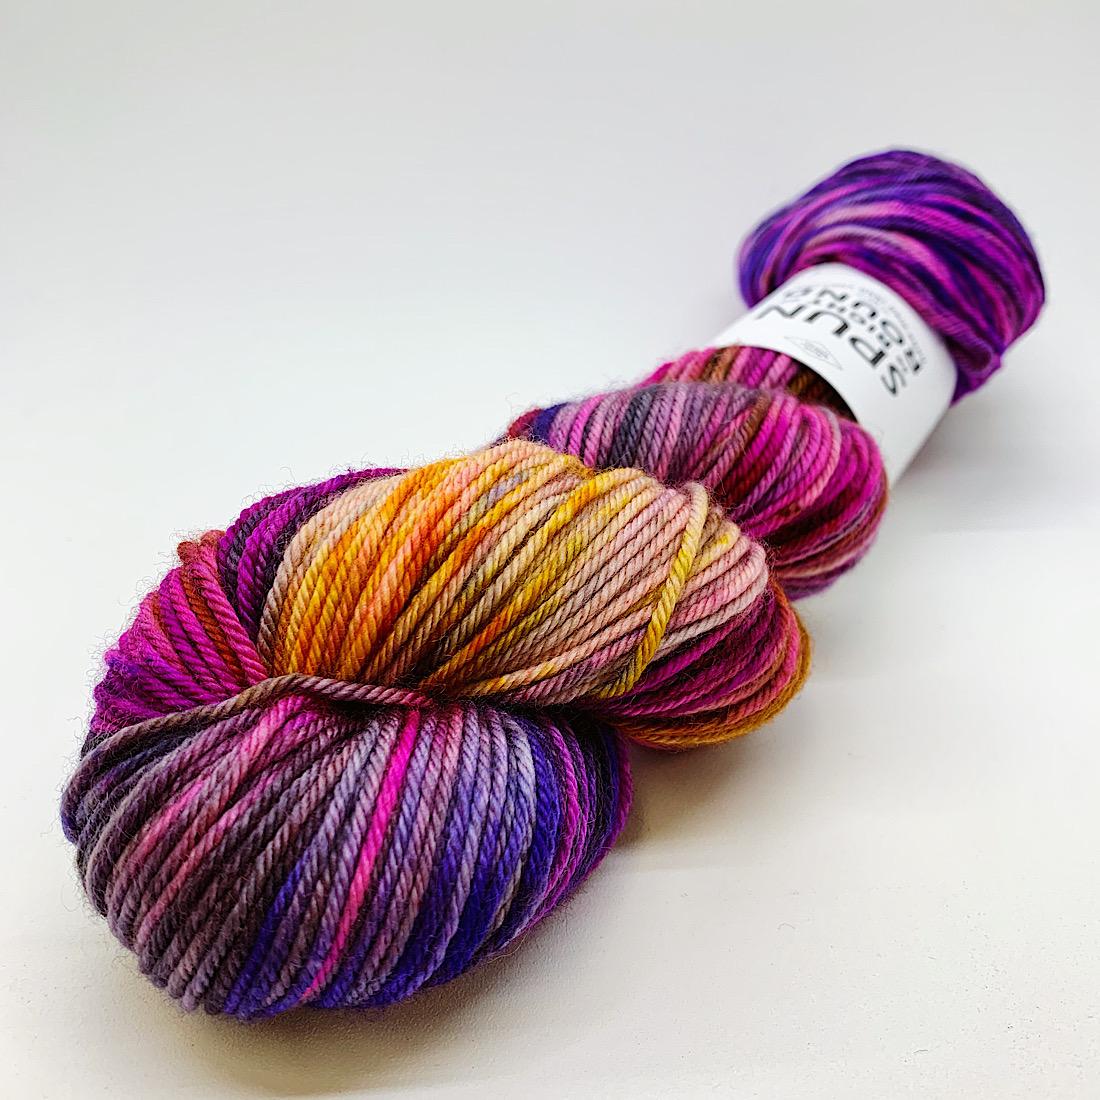 Purple Orchid* Gradient yarn 75/25 Merino/Silk - Fingering - hand dyed  yarns and more